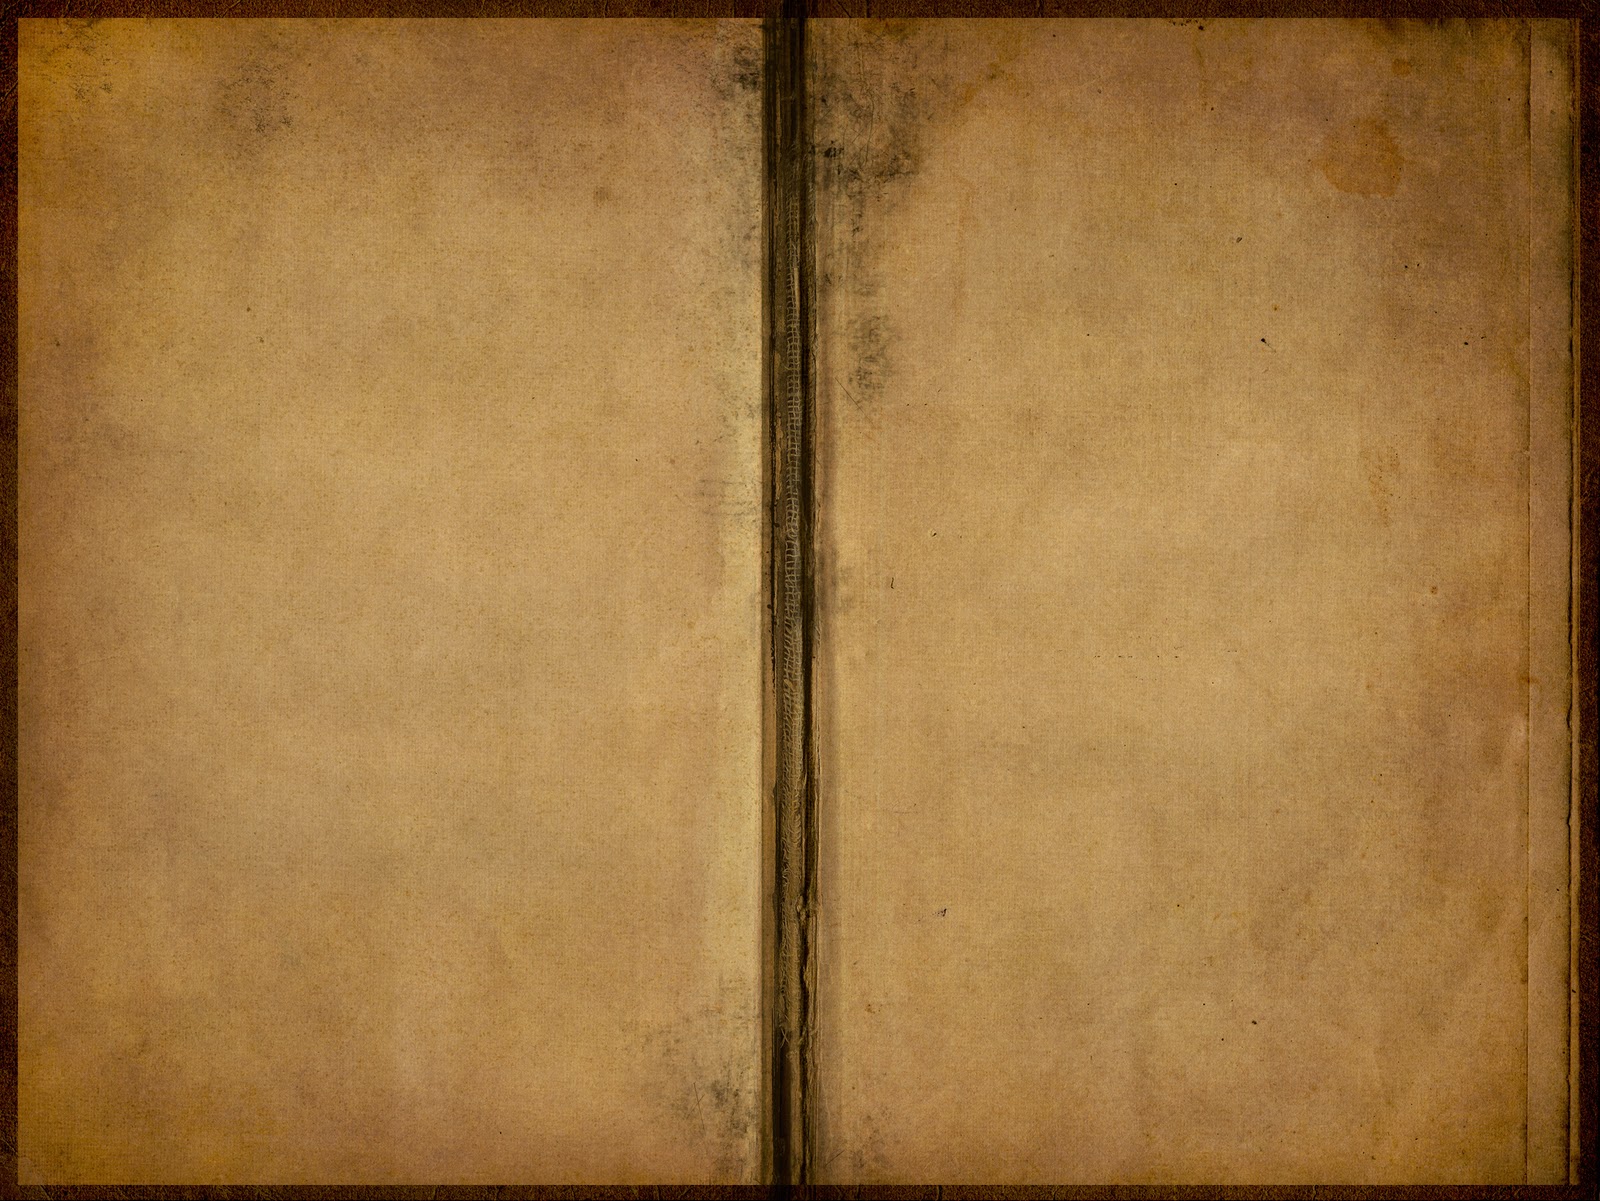 Old Book Background Wallpaper For Powerpoint Presentations